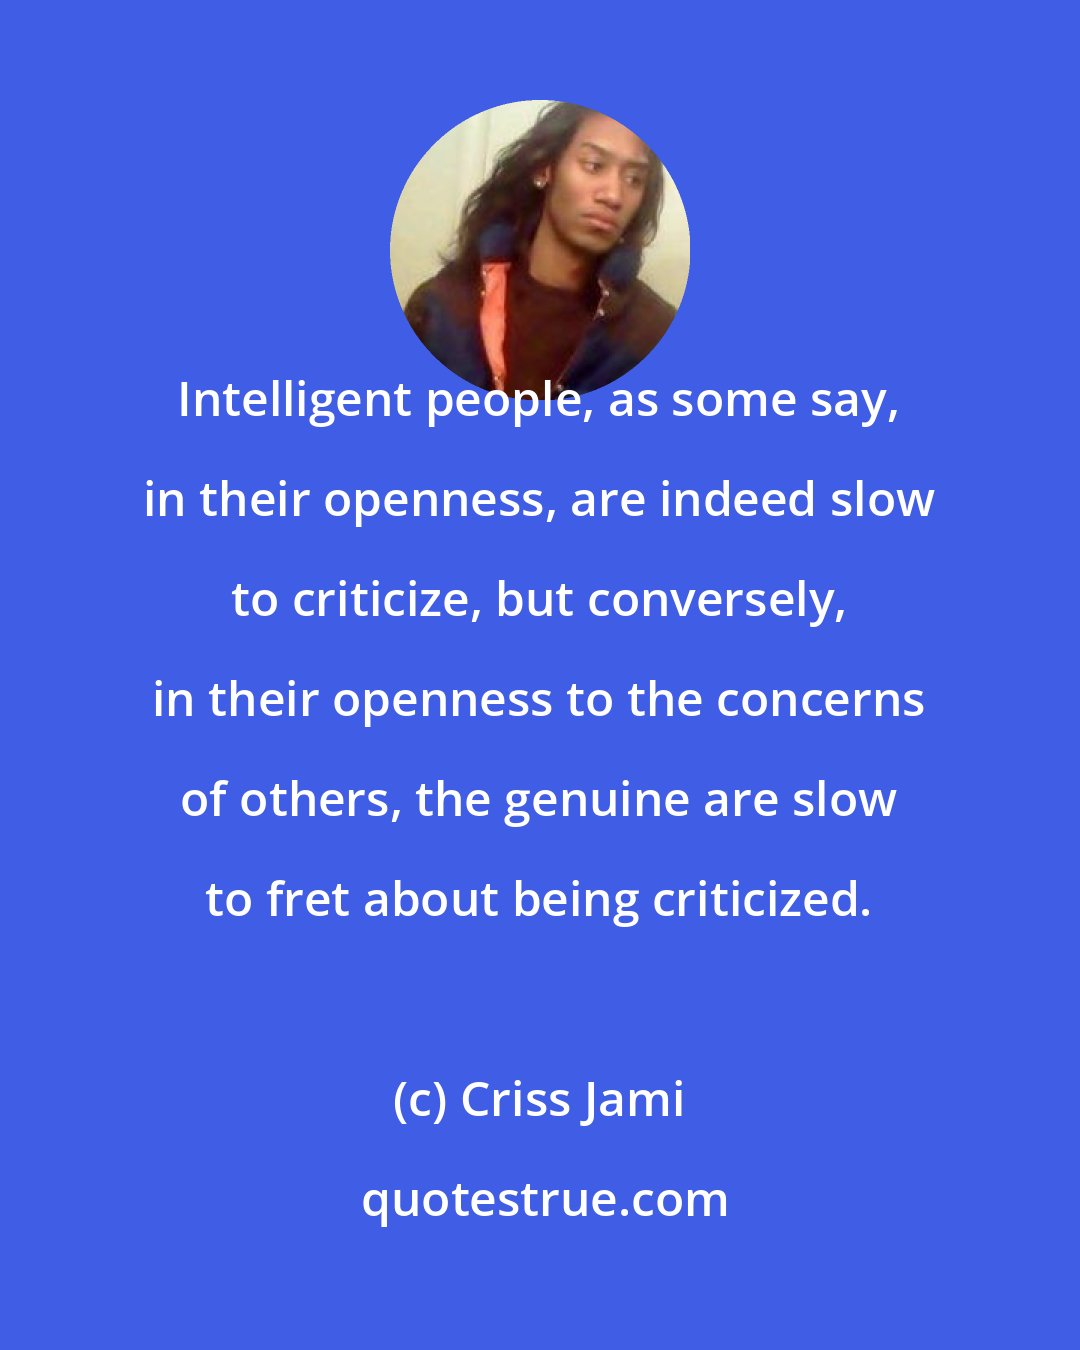 Criss Jami: Intelligent people, as some say, in their openness, are indeed slow to criticize, but conversely, in their openness to the concerns of others, the genuine are slow to fret about being criticized.